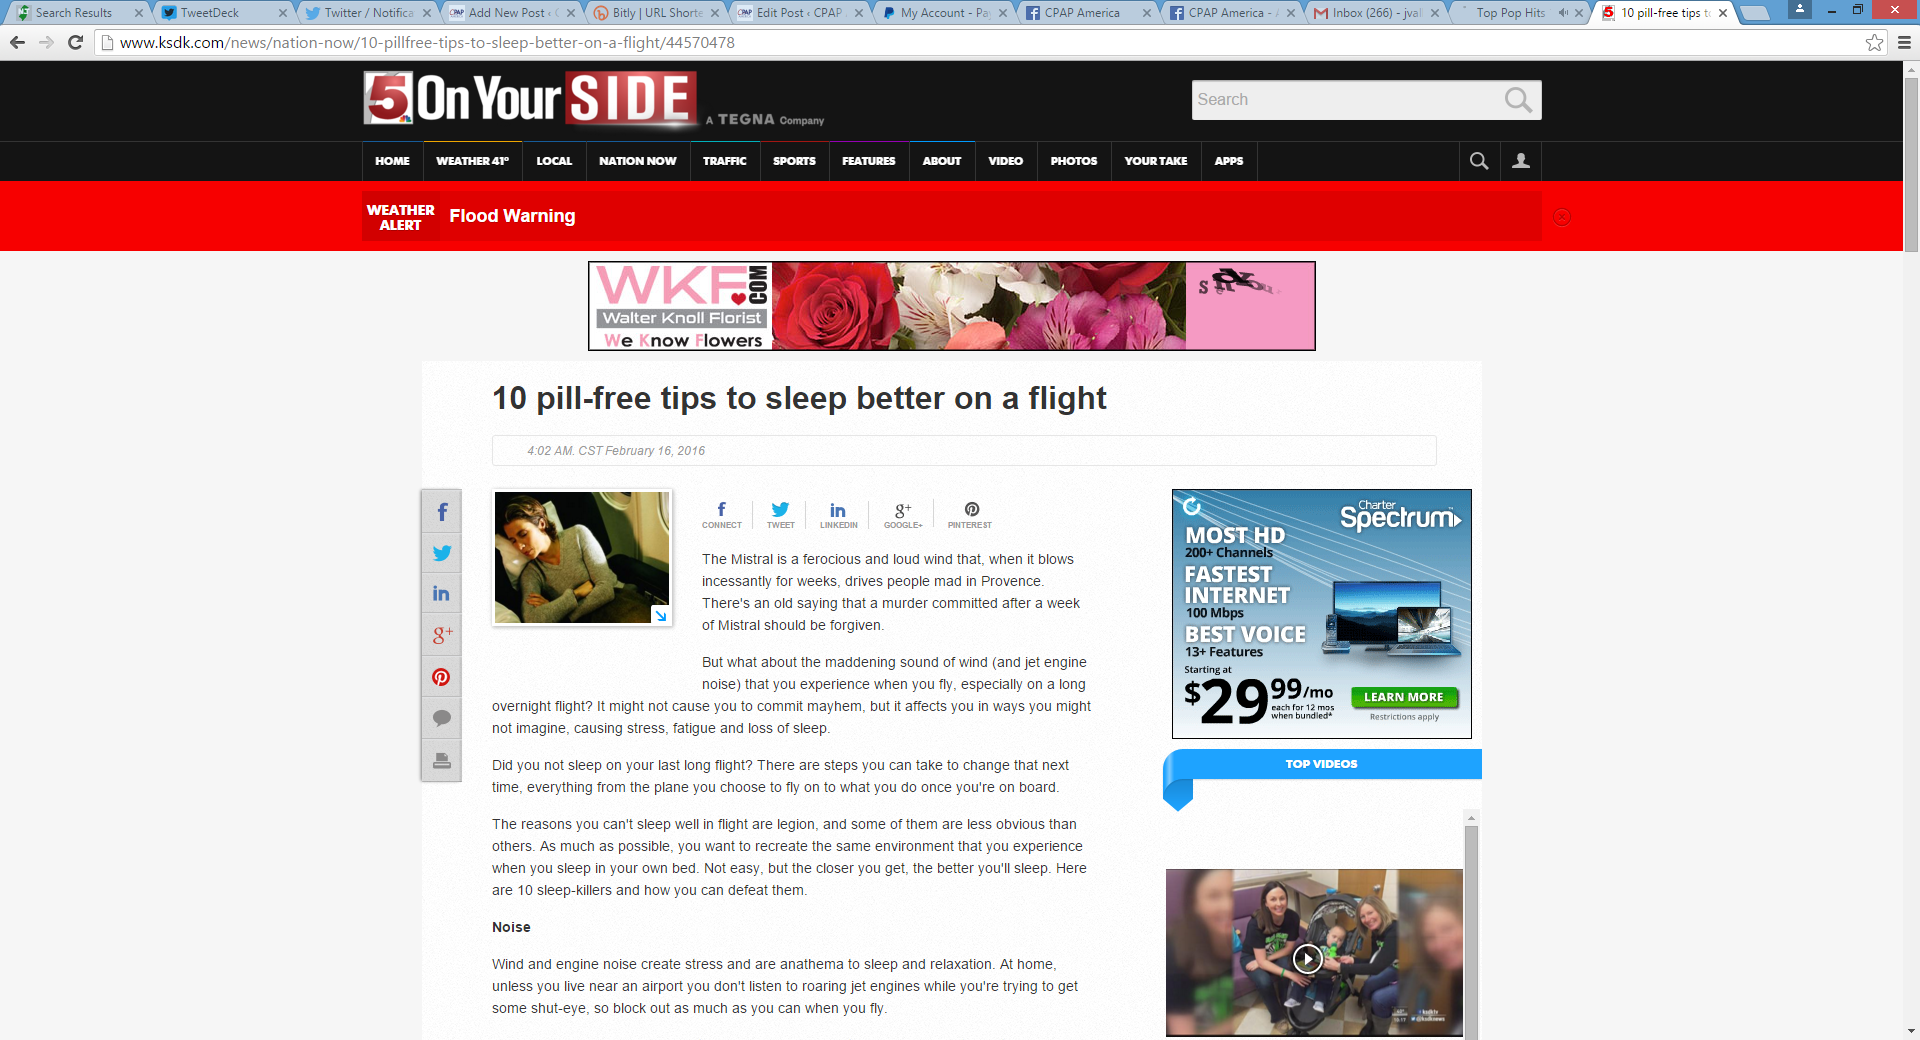 Having sleep issues on a flight? Check out these tips